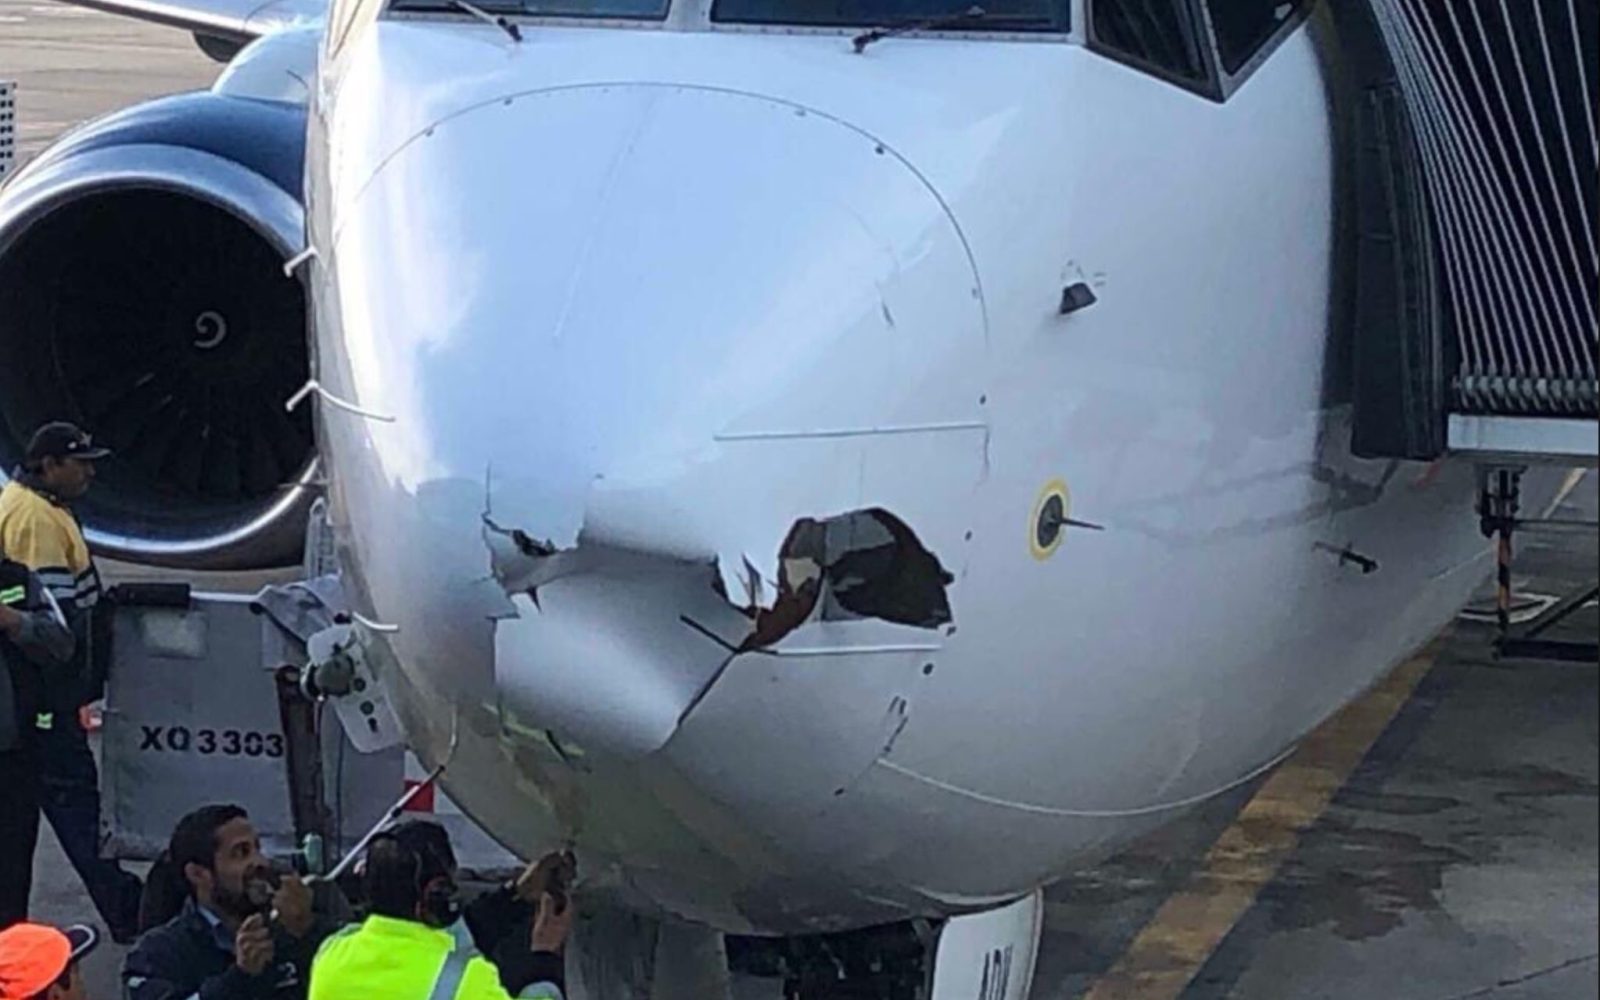 Boeing 737 passenger jet damaged. Possibly hit by drone before landing